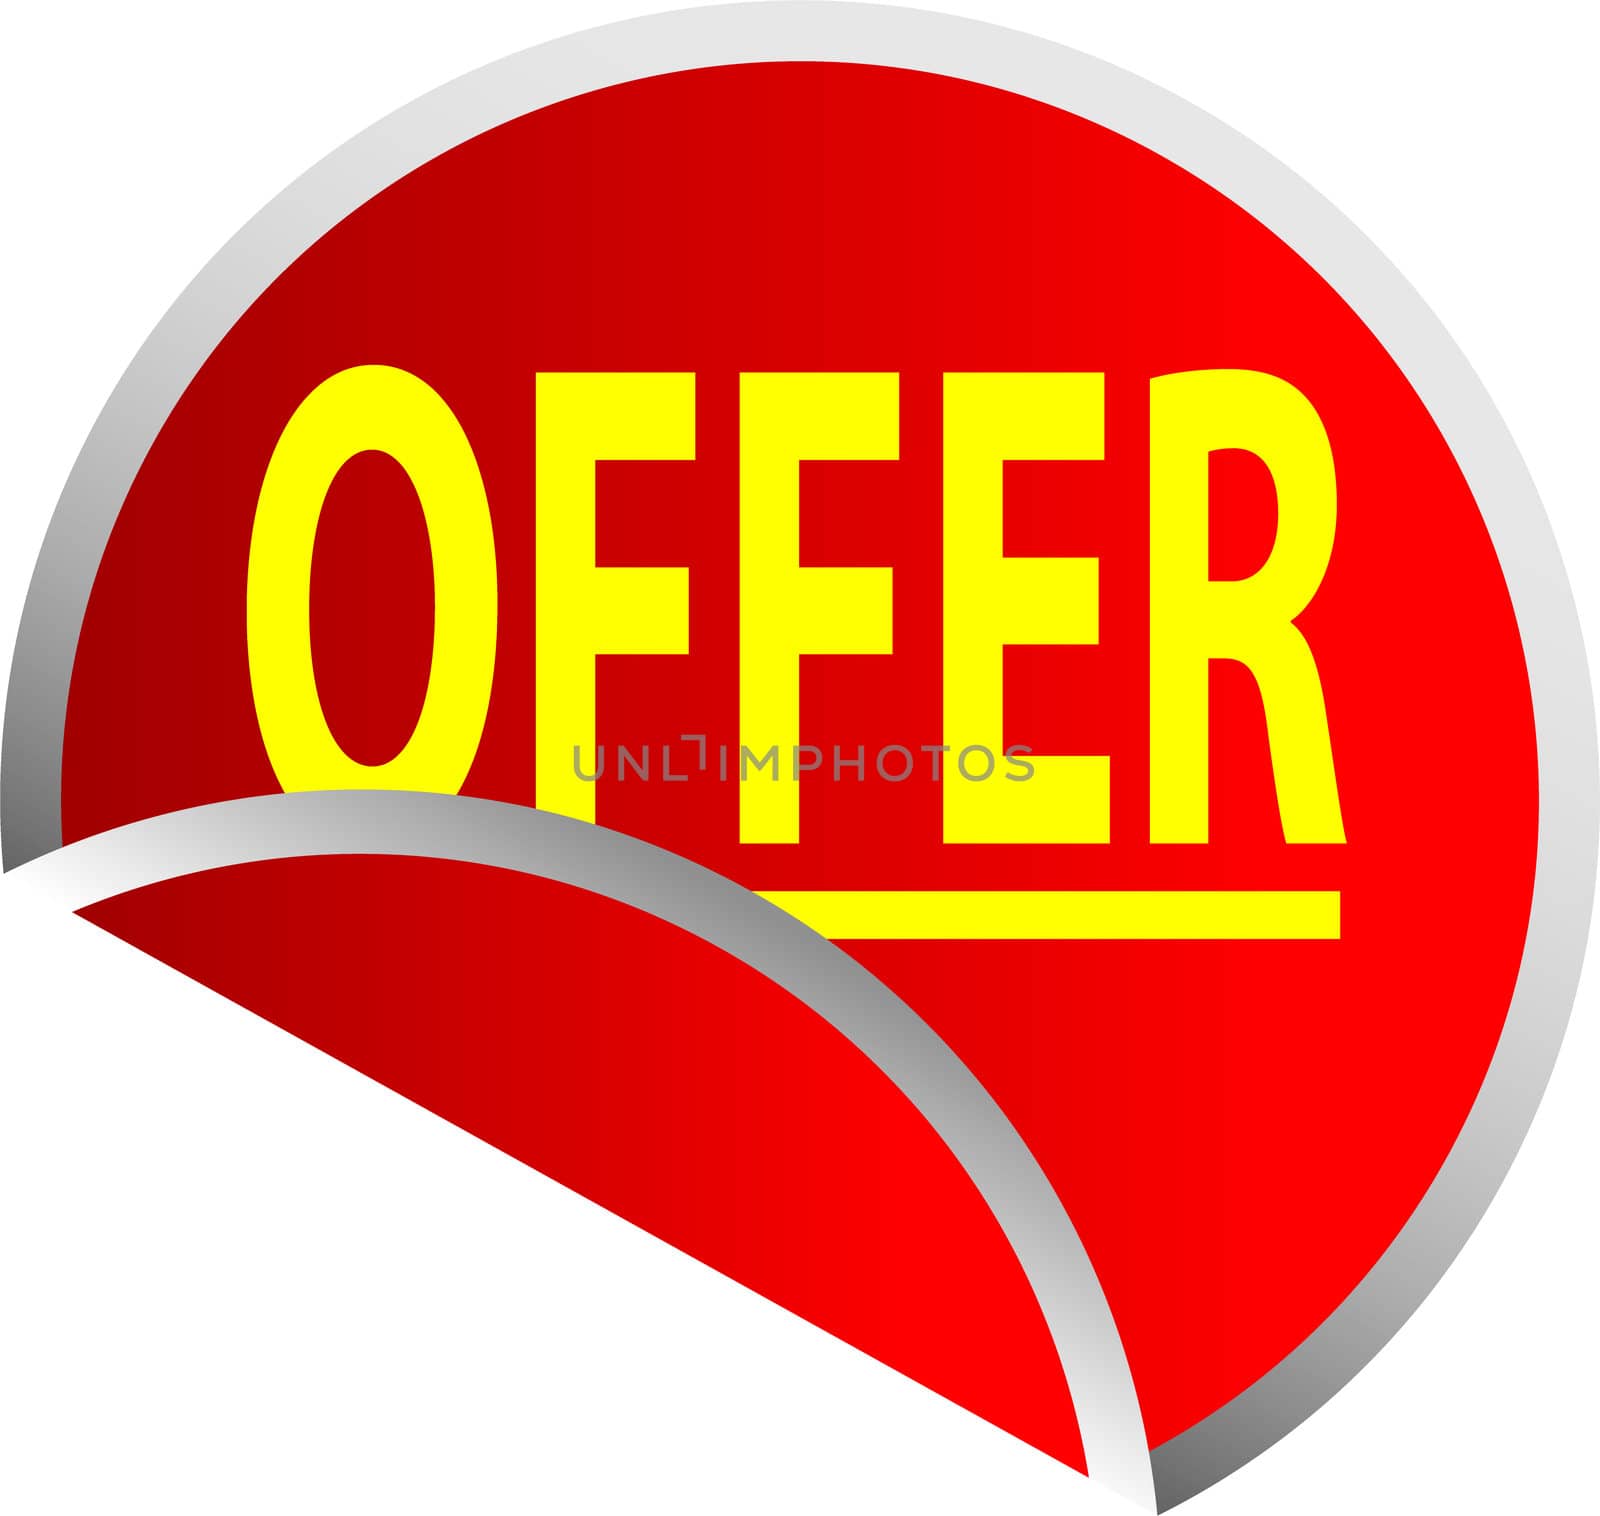 Button Offer by peromarketing